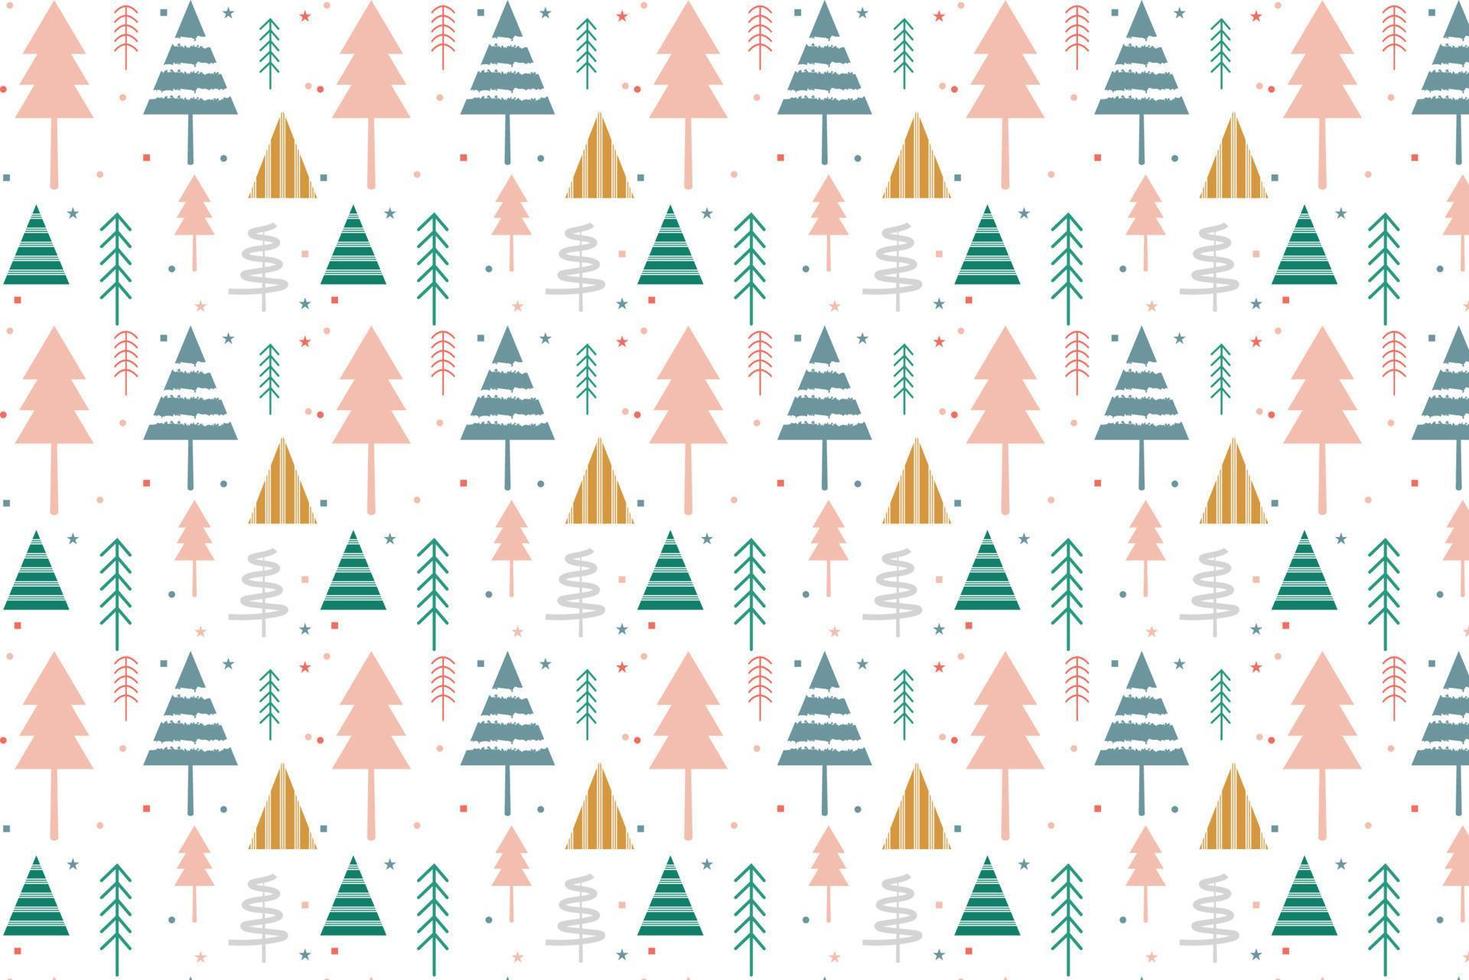 Simple Christmas seamless pattern with geometric motifs. Snowflakes and circles with different ornaments. Magic nature fantasy snowfall texture decoration design vector